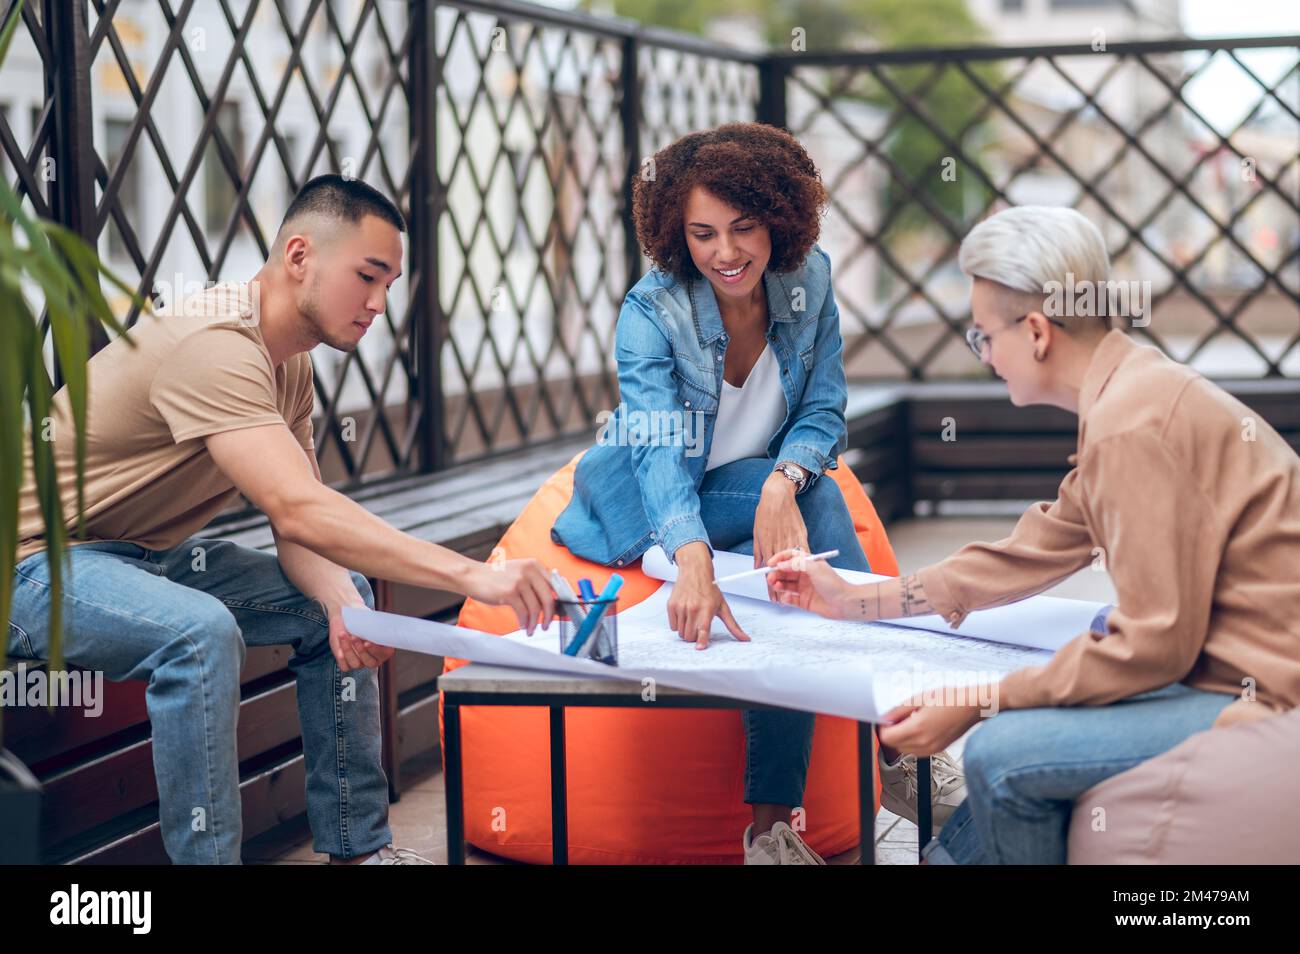 Architectural team working on a site development plan Stock Photo